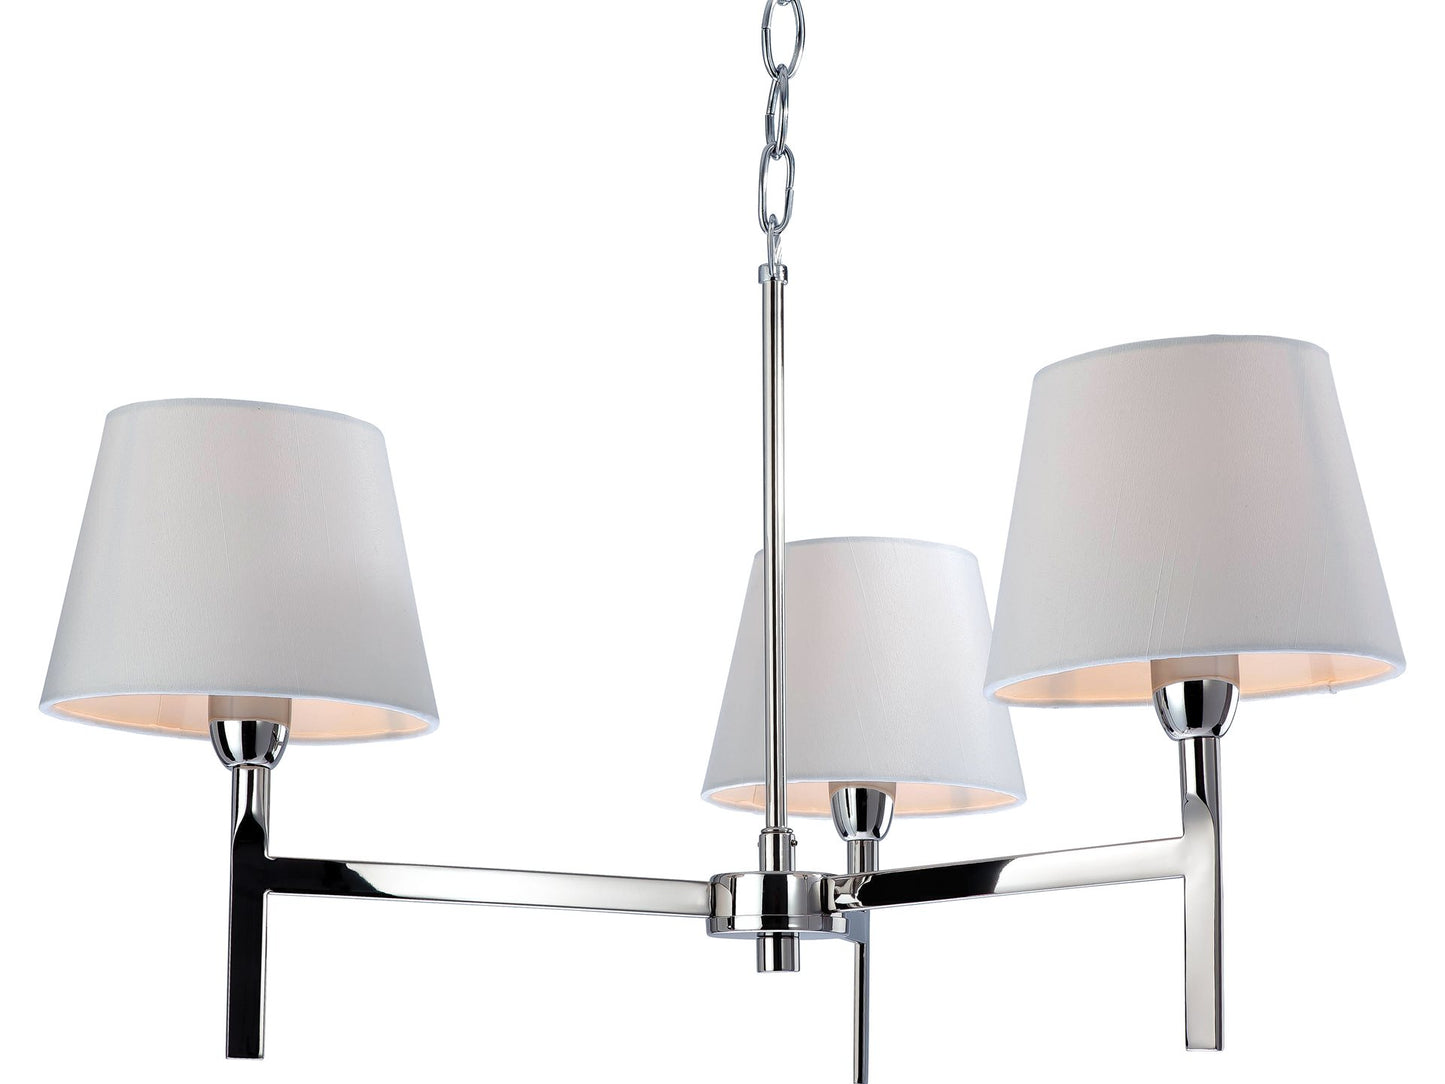 Transition 3 Light Fitting Polished Stainless Steel with Cream Shades